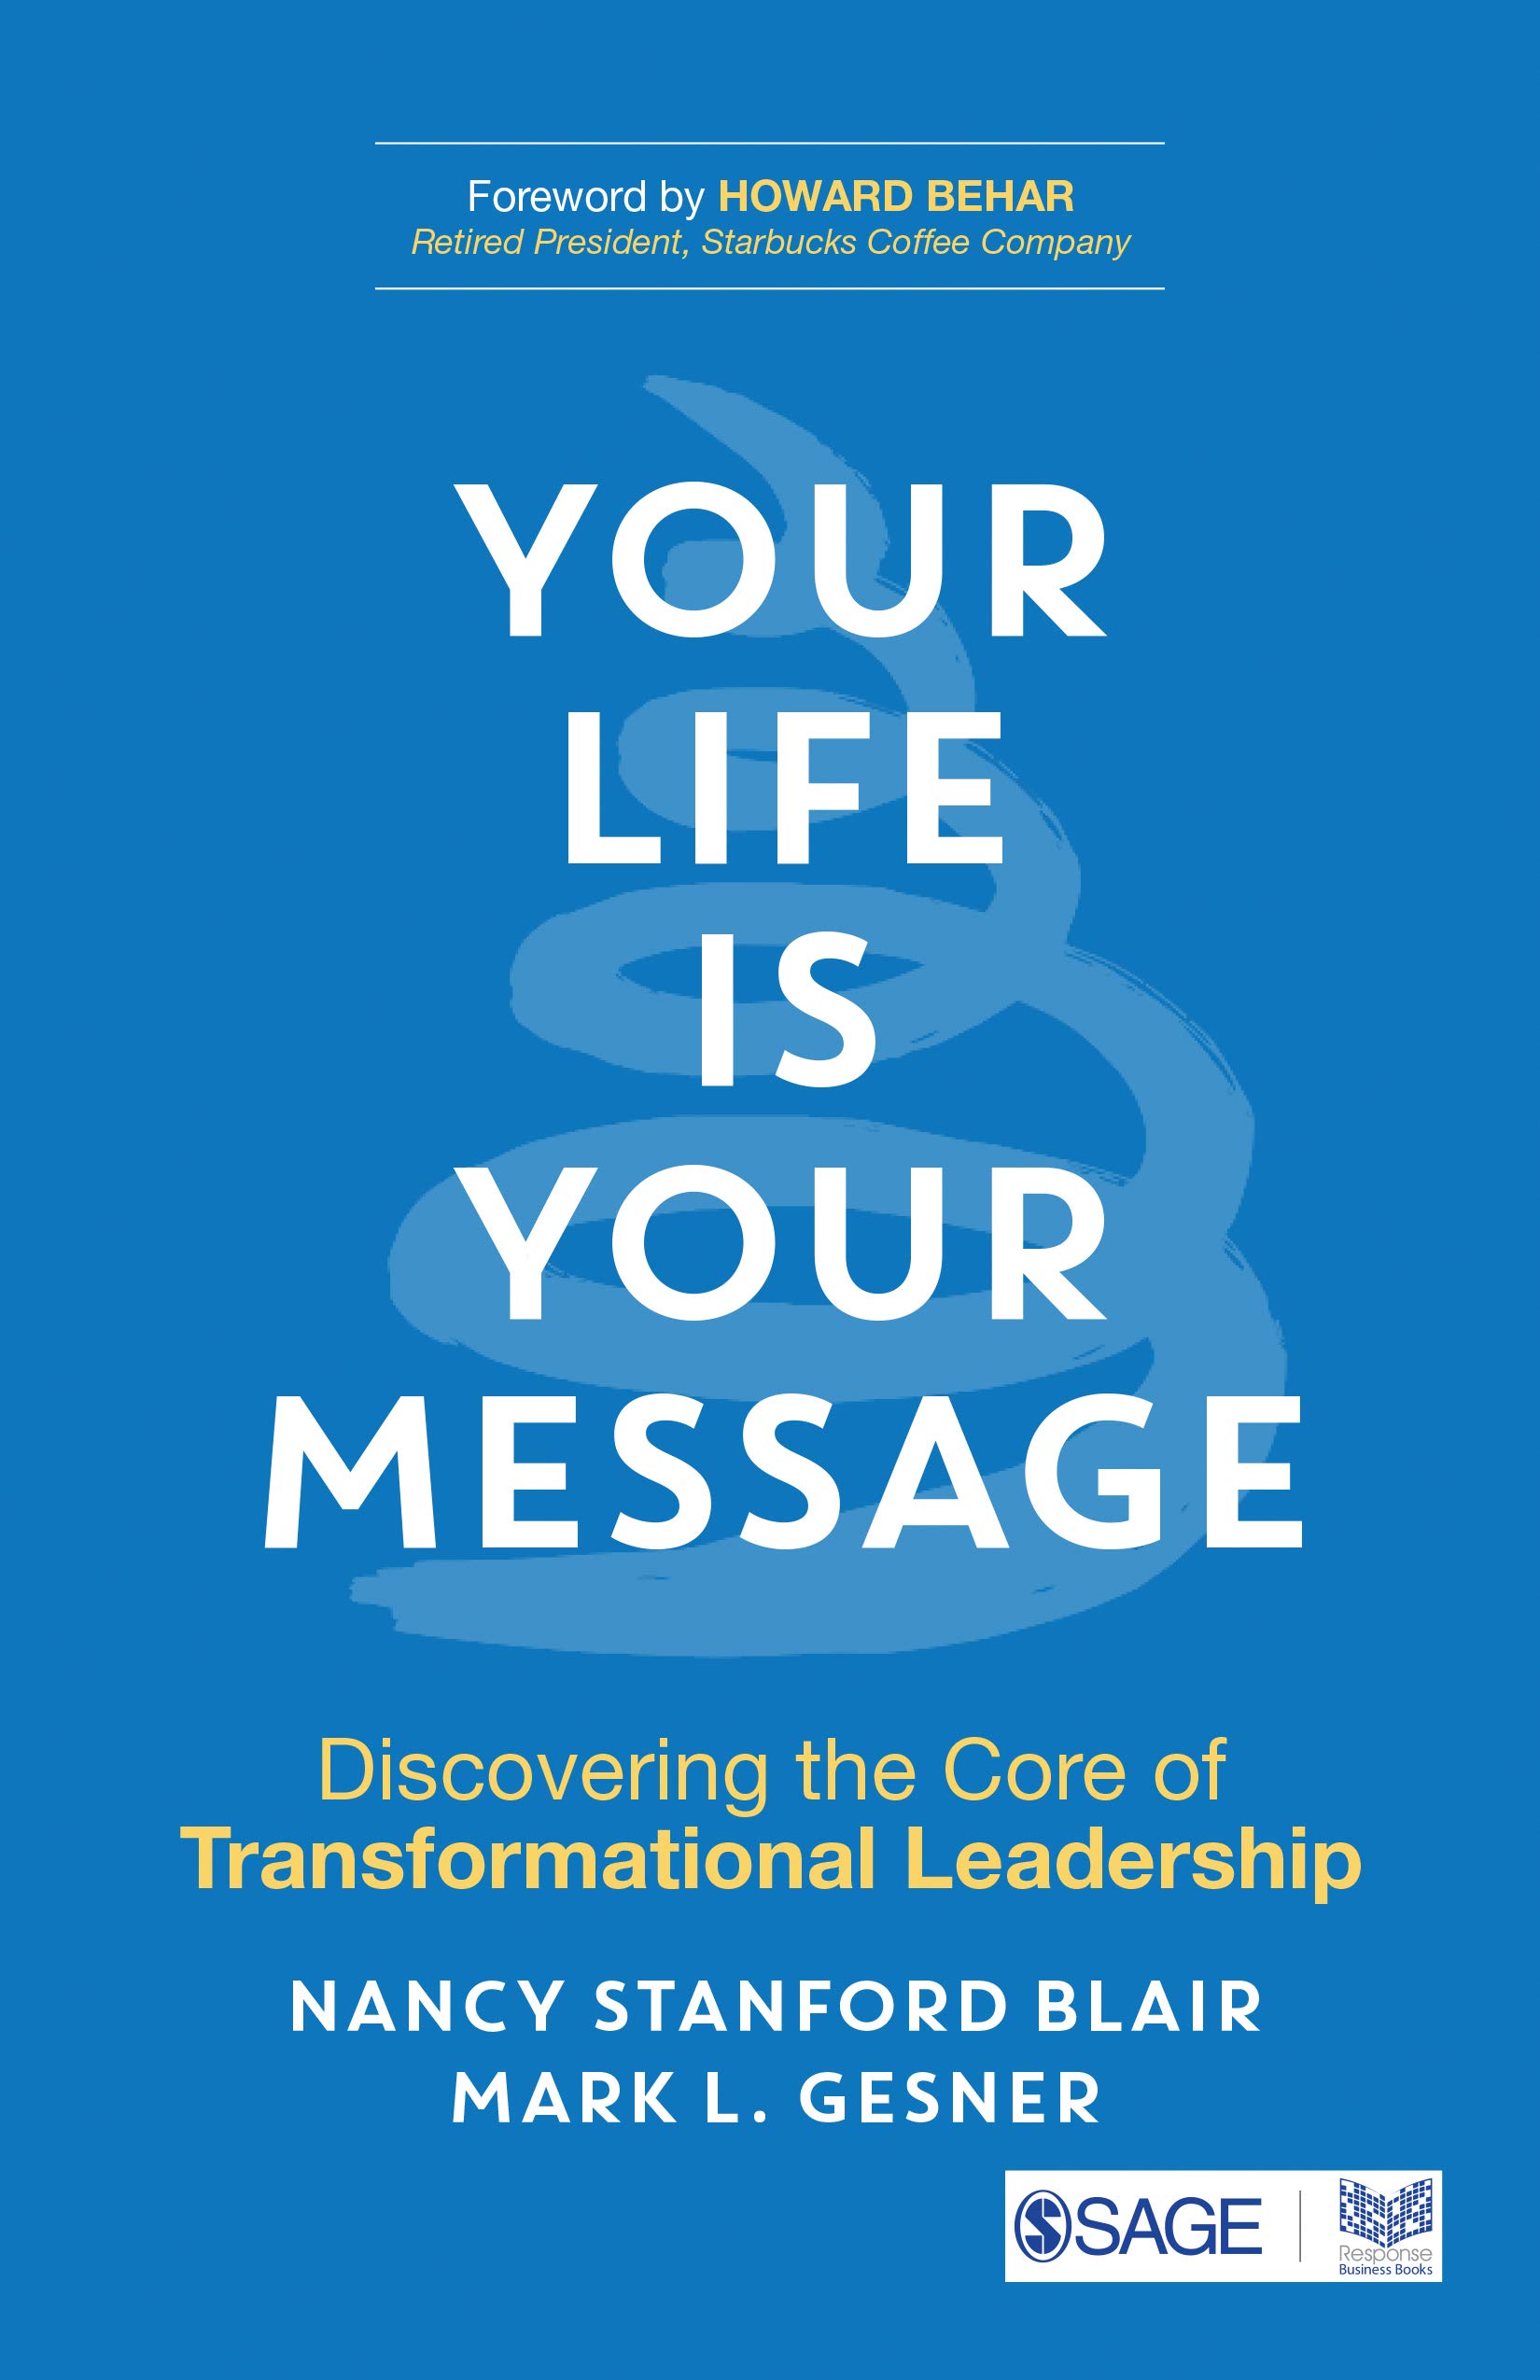 Your Life is Your Message | Nancy Stanford Blair, Mark L. Gesner image7